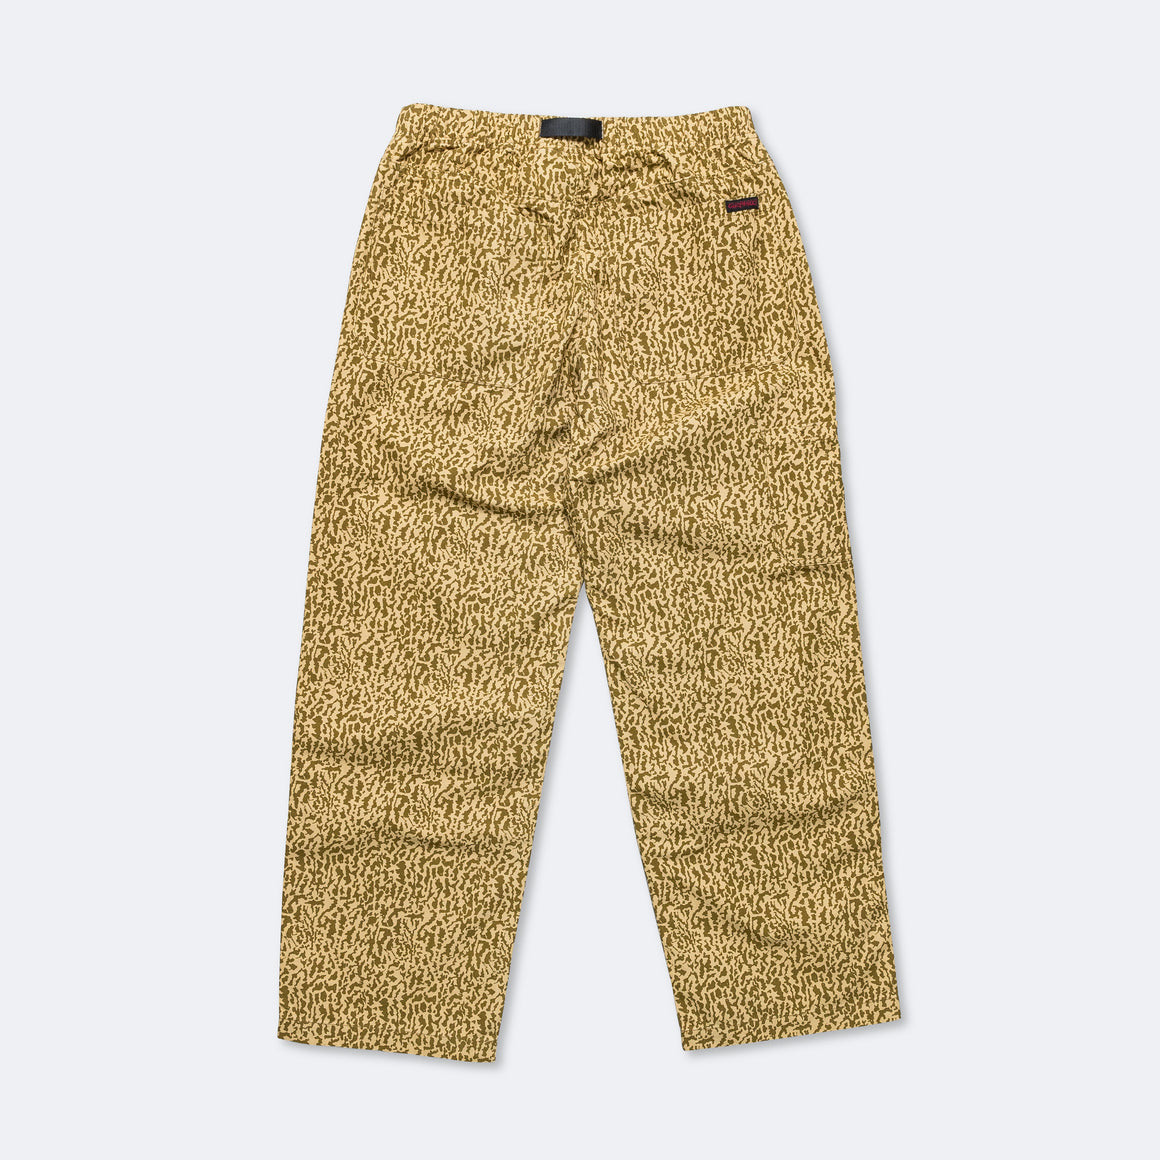 Gramicci - Canvas Double Knee Pant - Micro Bark - UP THERE